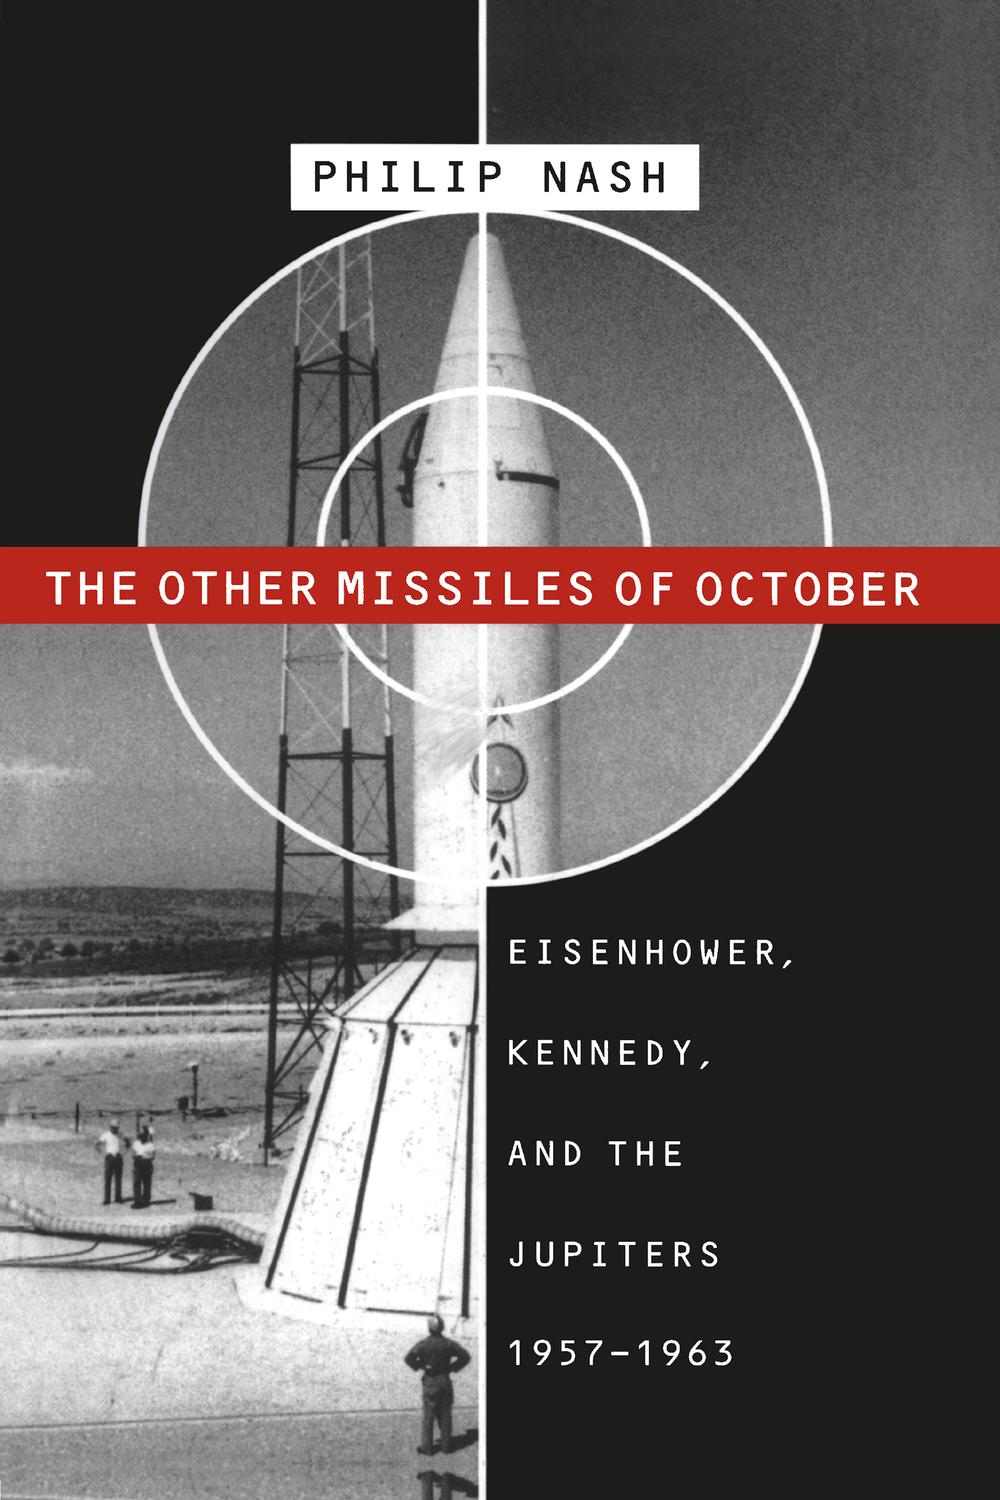 The Other Missiles of October - Philip Nash